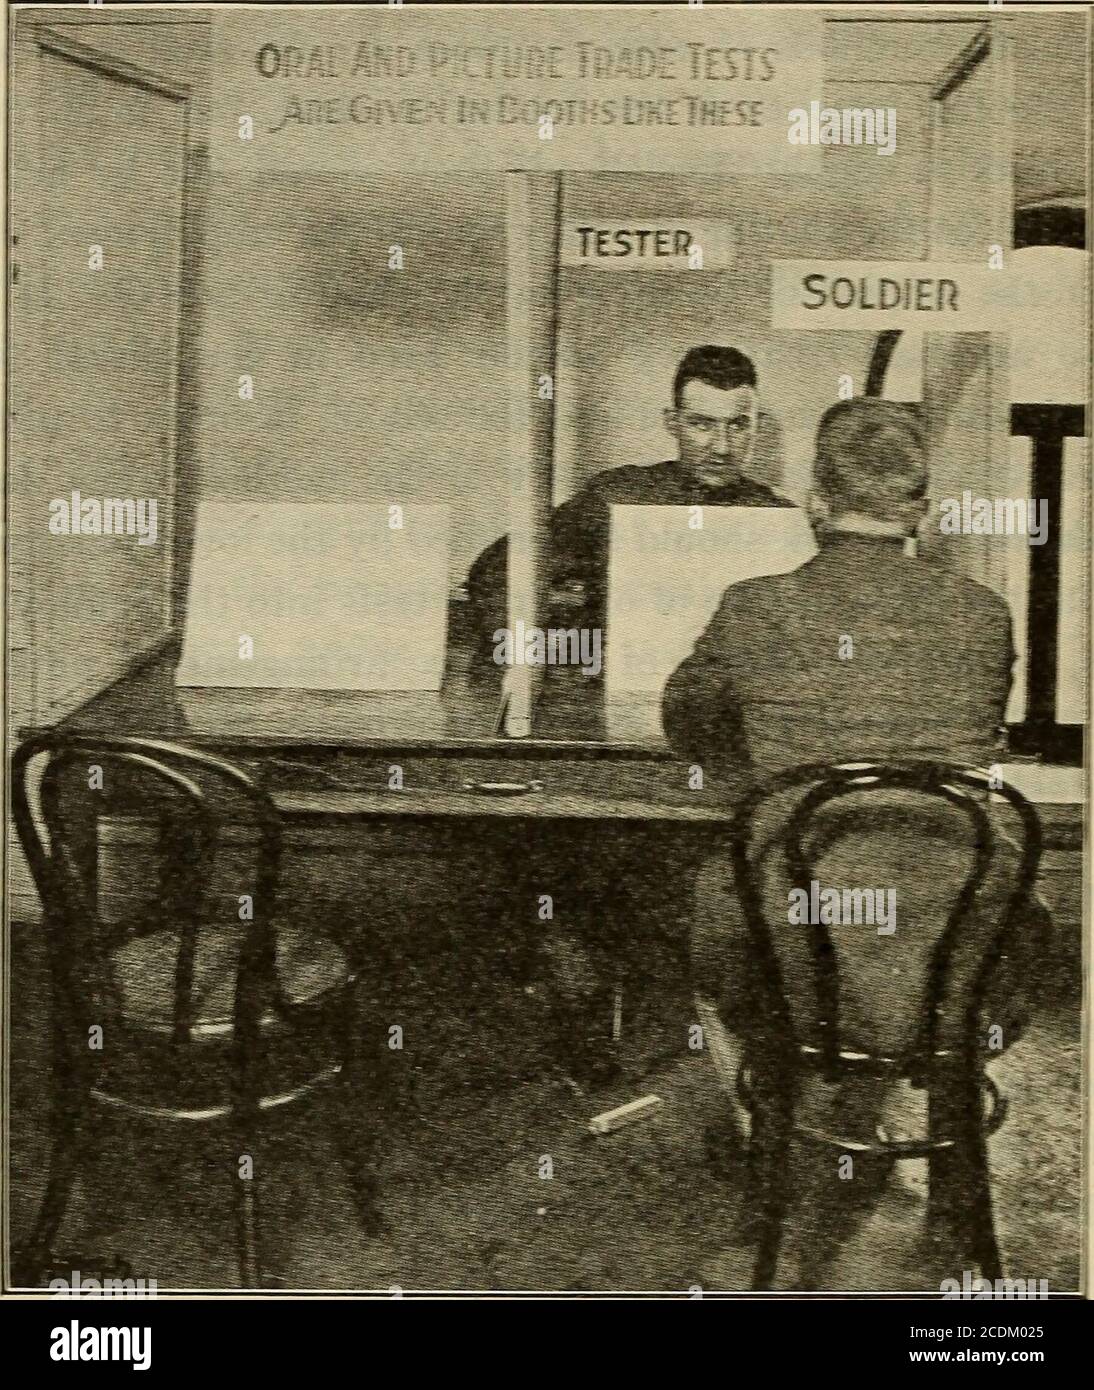 . Trade tests; the scientific measurement of trade proficiency . out-ing, or by constructing small booths or office partitions at ^con-venient places. The army in its interview work, when a tradeexamination was necessary, used partitions, such as those shownin the illustration. Where the existing arrangements cannotbe altered, the oral tests can be given with reasonable successprovided one apphcant is called up at a time. The commonpractice of allowing all that takes place between the interviewerand the apphcant to be heard by a number of men, who in manycases are pushing and shoving for the n Stock Photo